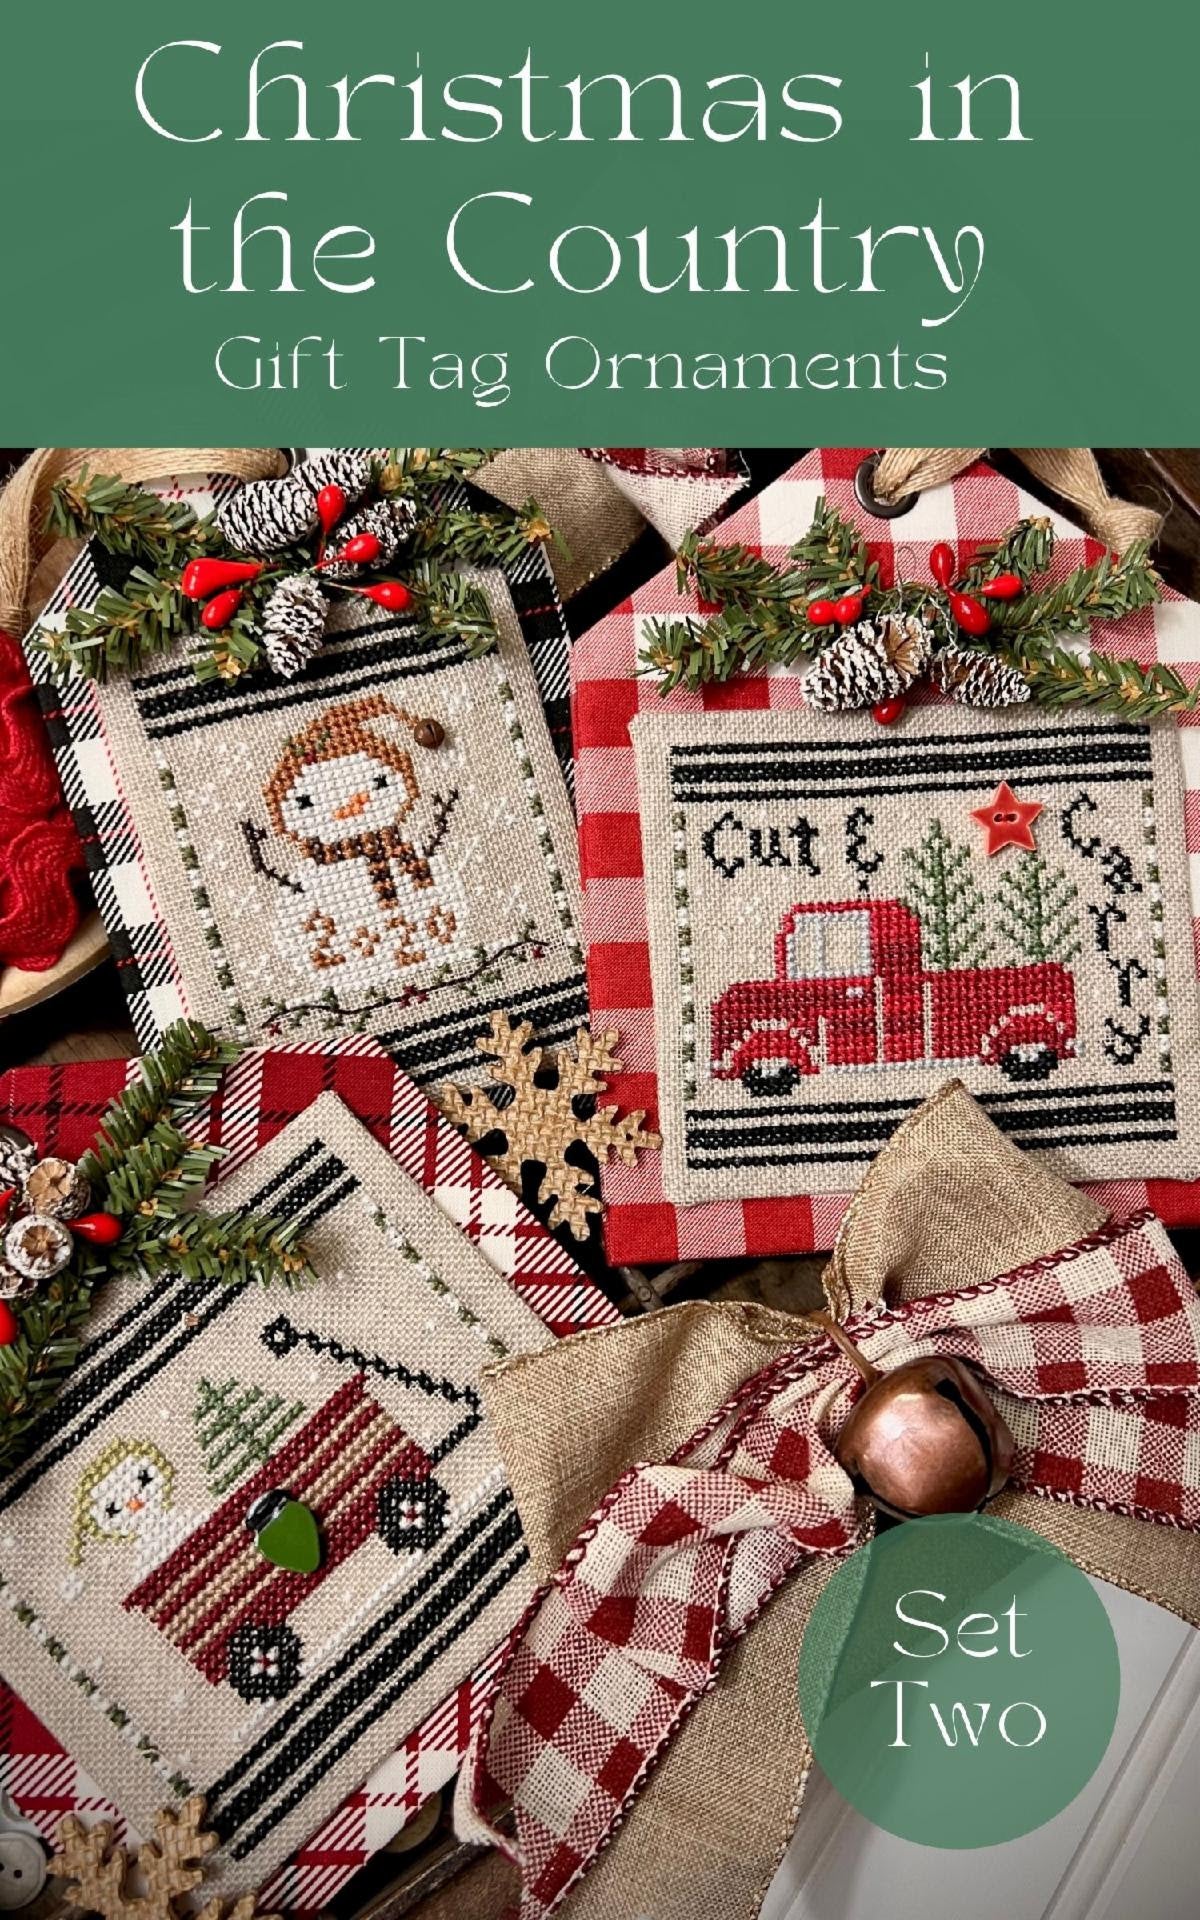 Christmas in the Country Gift Tag Ornaments #2-  Annie Beez Folk Art - Cross Stitch Pattern, Needlecraft Patterns, Needlecraft Patterns, The Crafty Grimalkin - A Cross Stitch Store